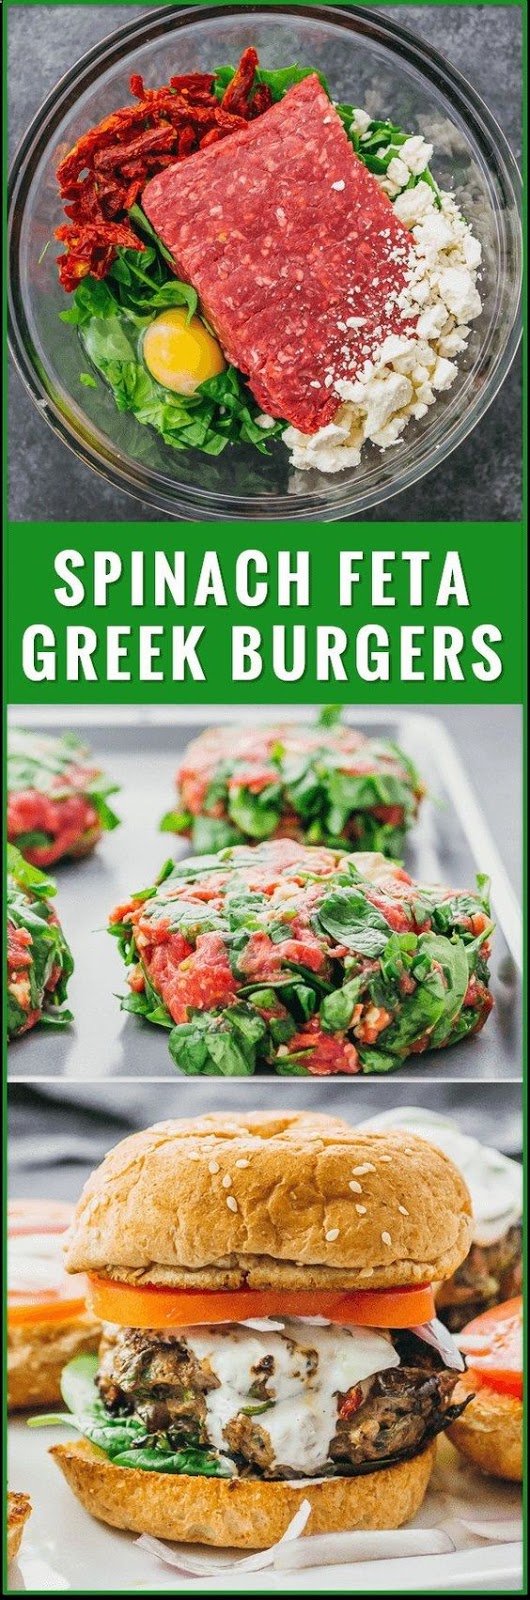 Greek Burgers with Spinach, Feta, and Sun-Dried Tomatoes